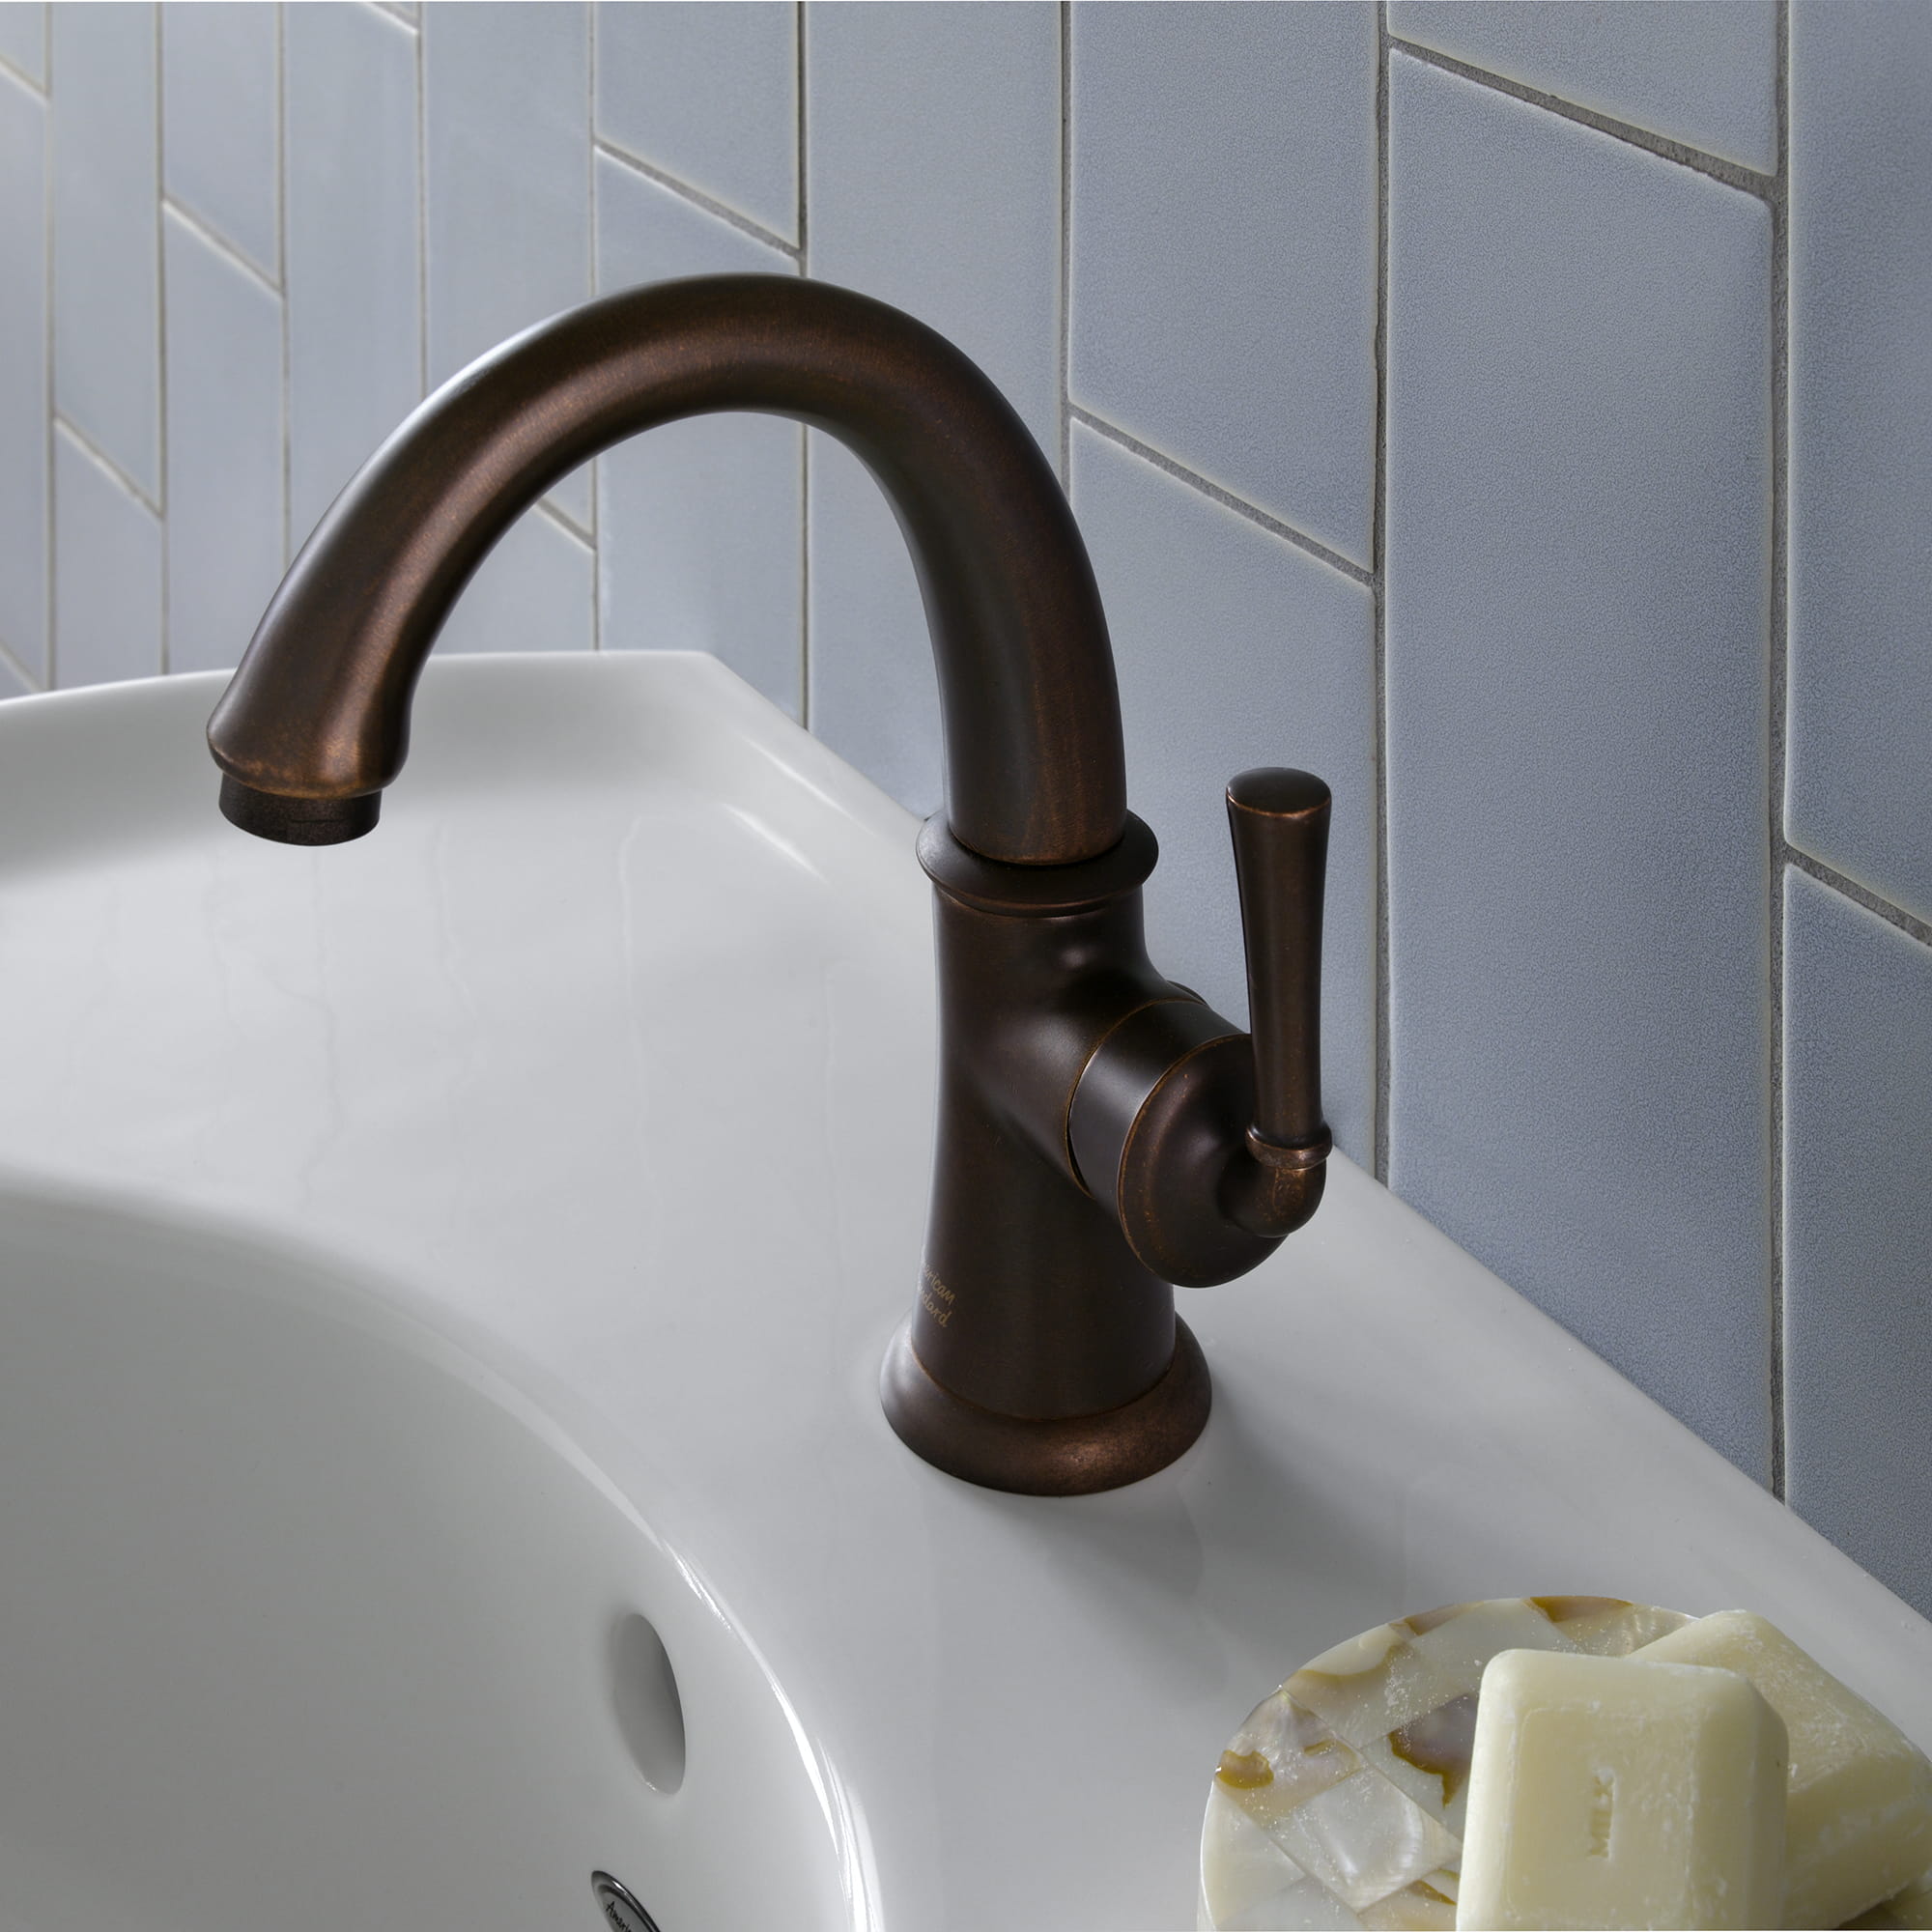 Portsmouth Single Hole Single Handle High Arc Bathroom Faucet 12 GPM with Lever Handle OIL RUBBED BRONZE